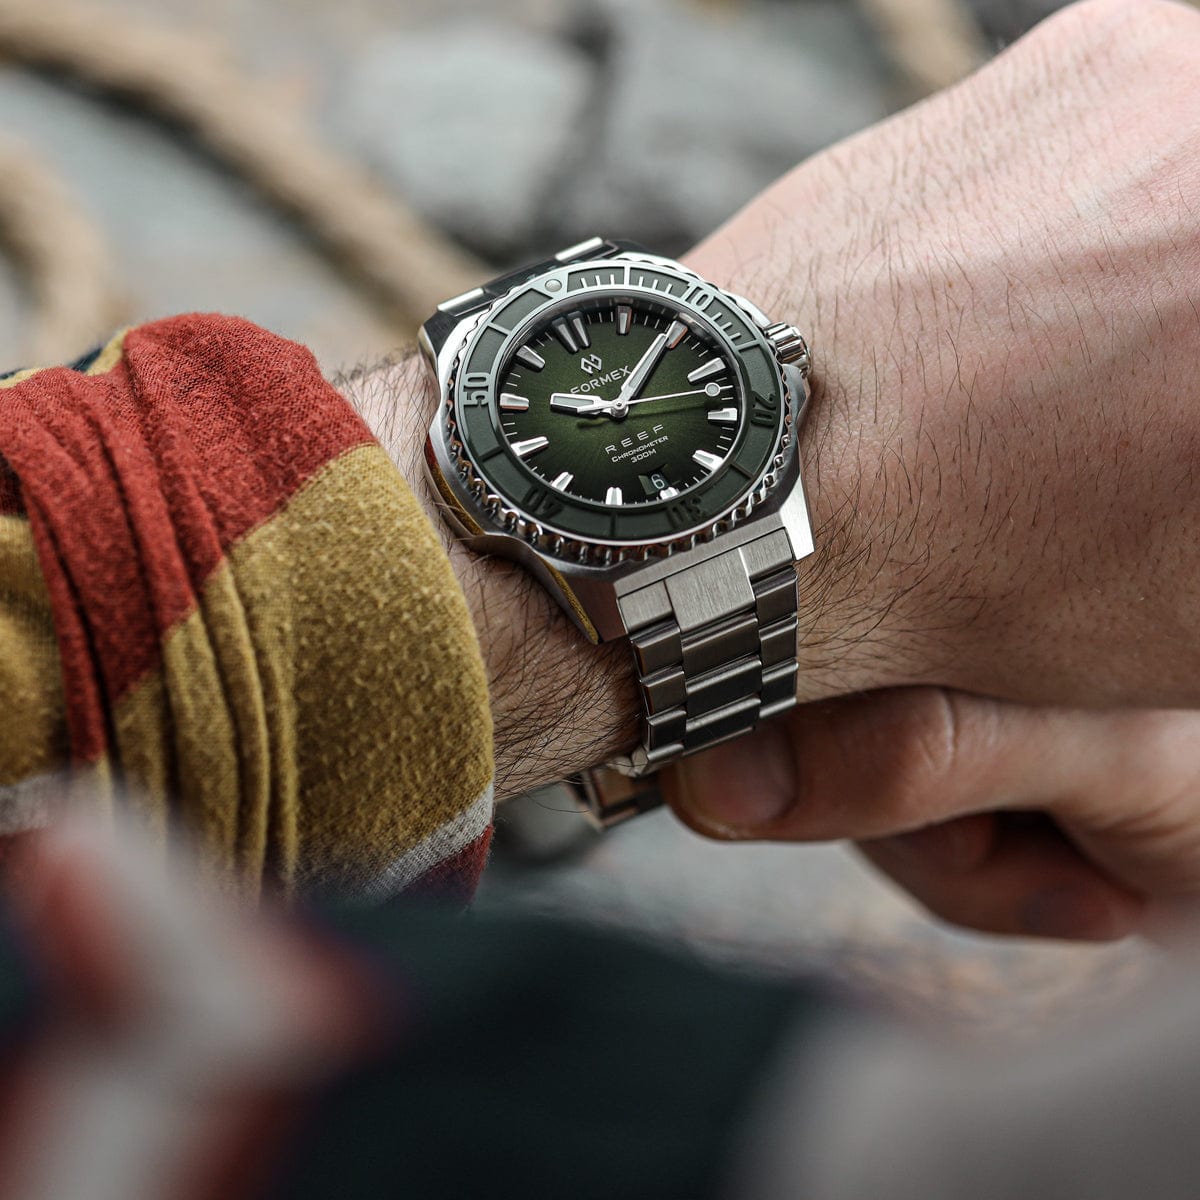 FORMEX REEF Automatic Chronometer - Green Dial / Green Bezel